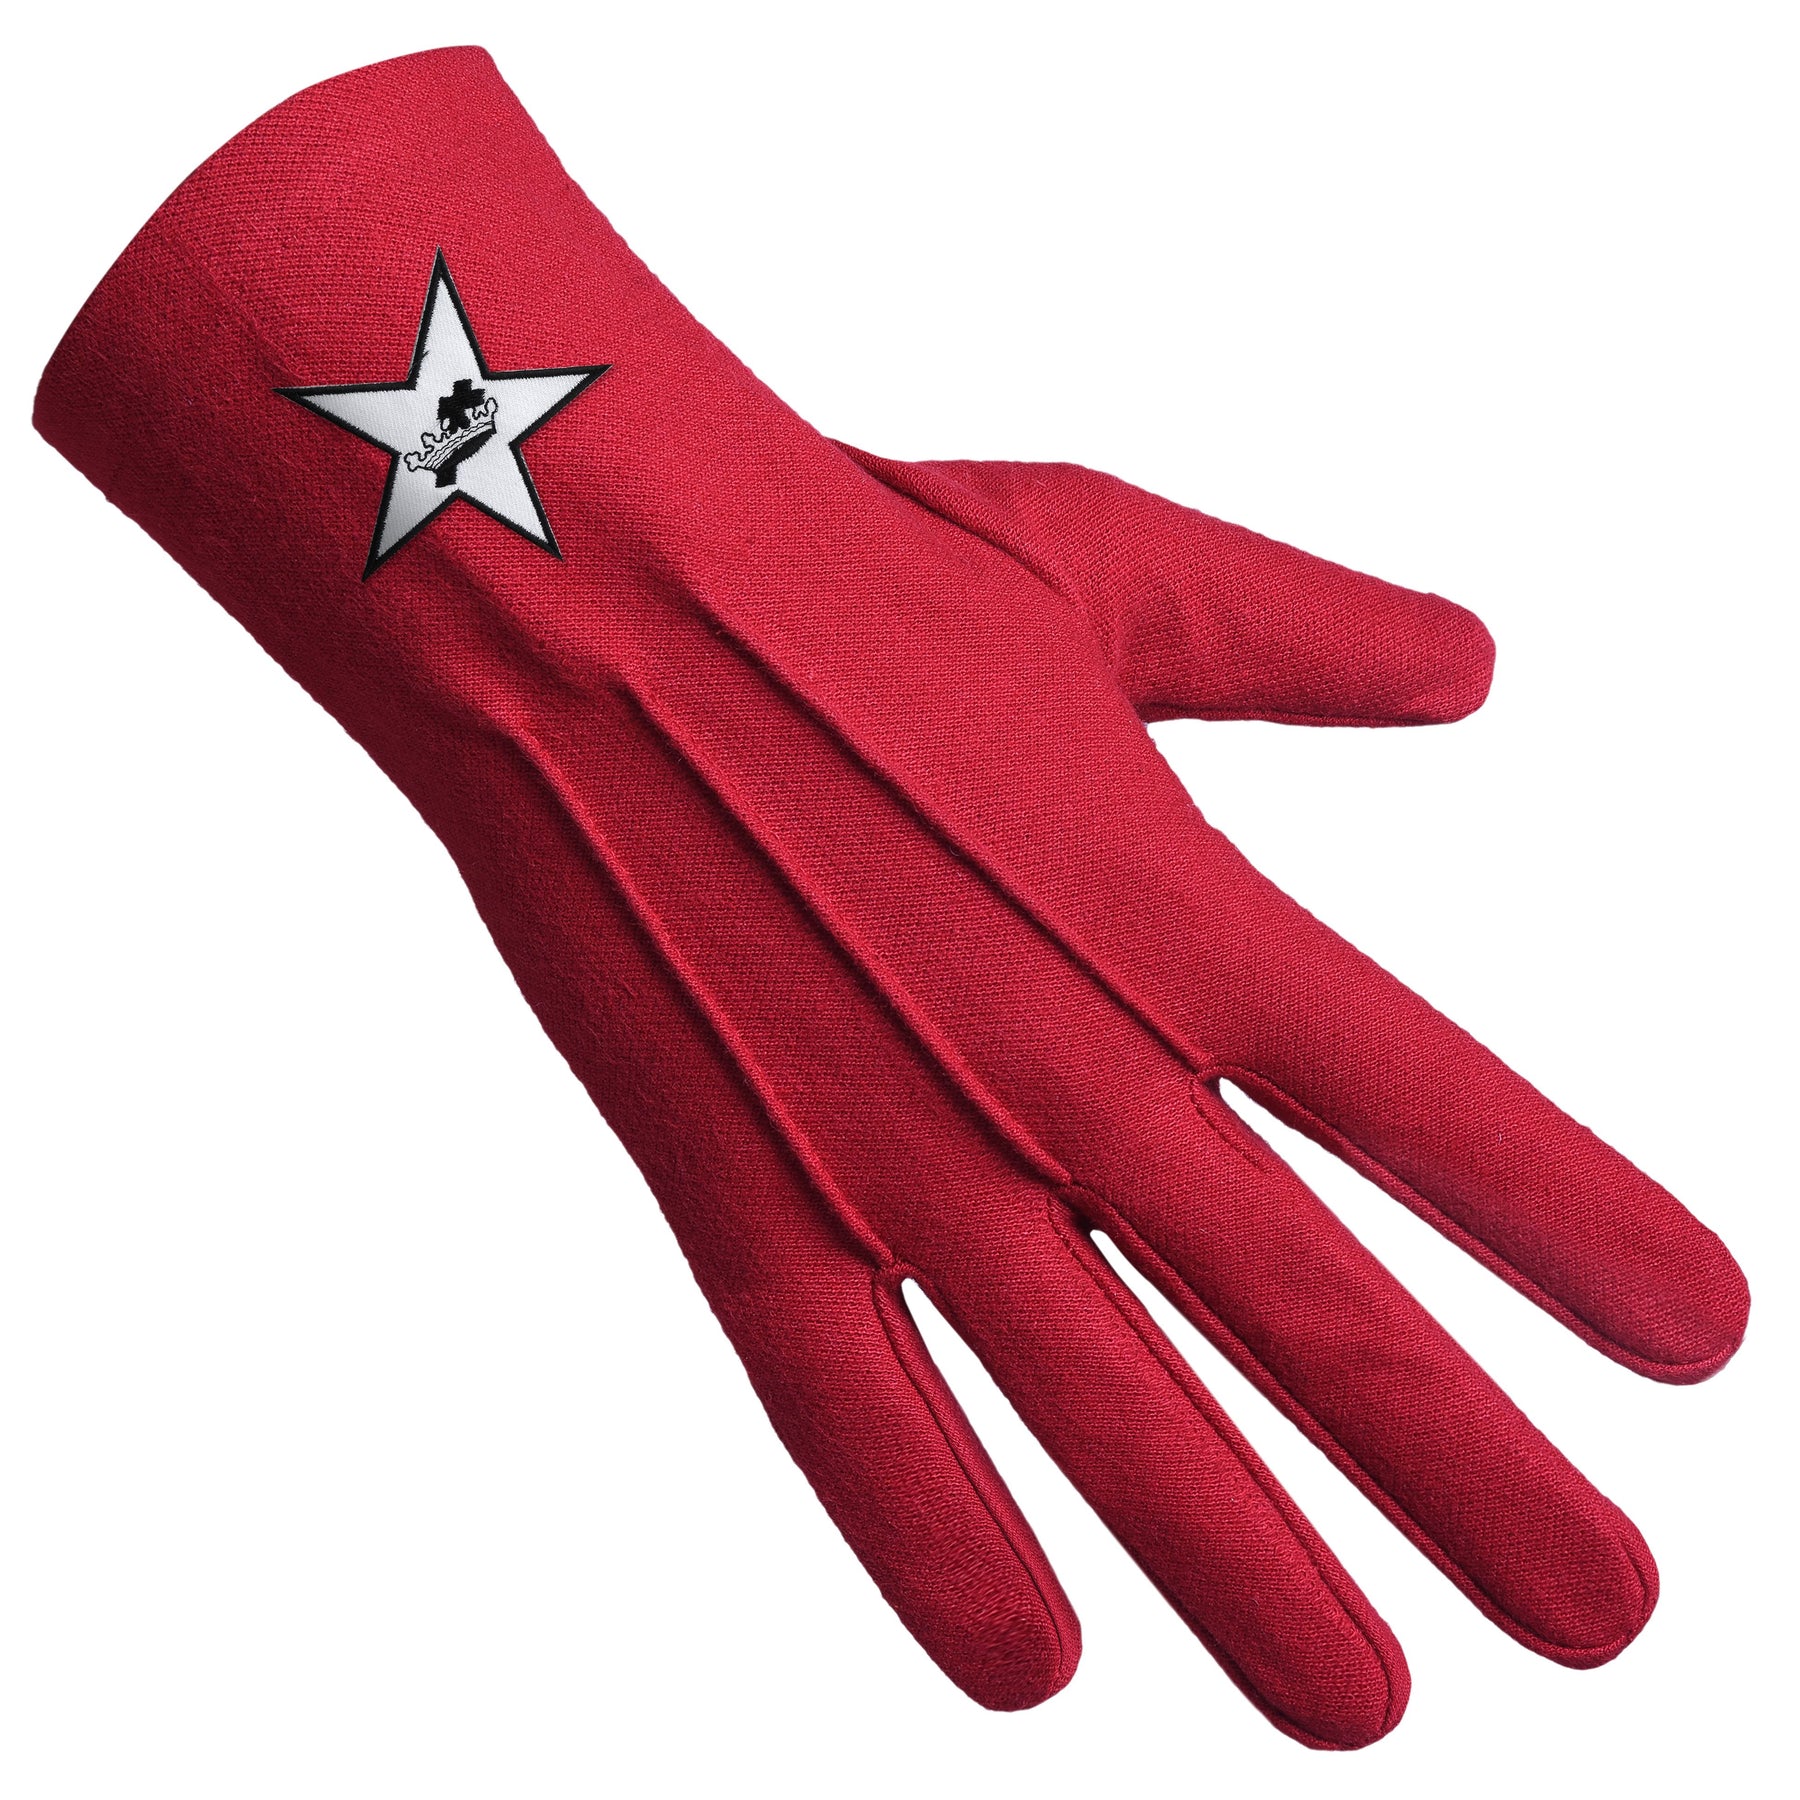 Knights Templar Commandery Glove - Red Cotton With Star Patch - Bricks Masons